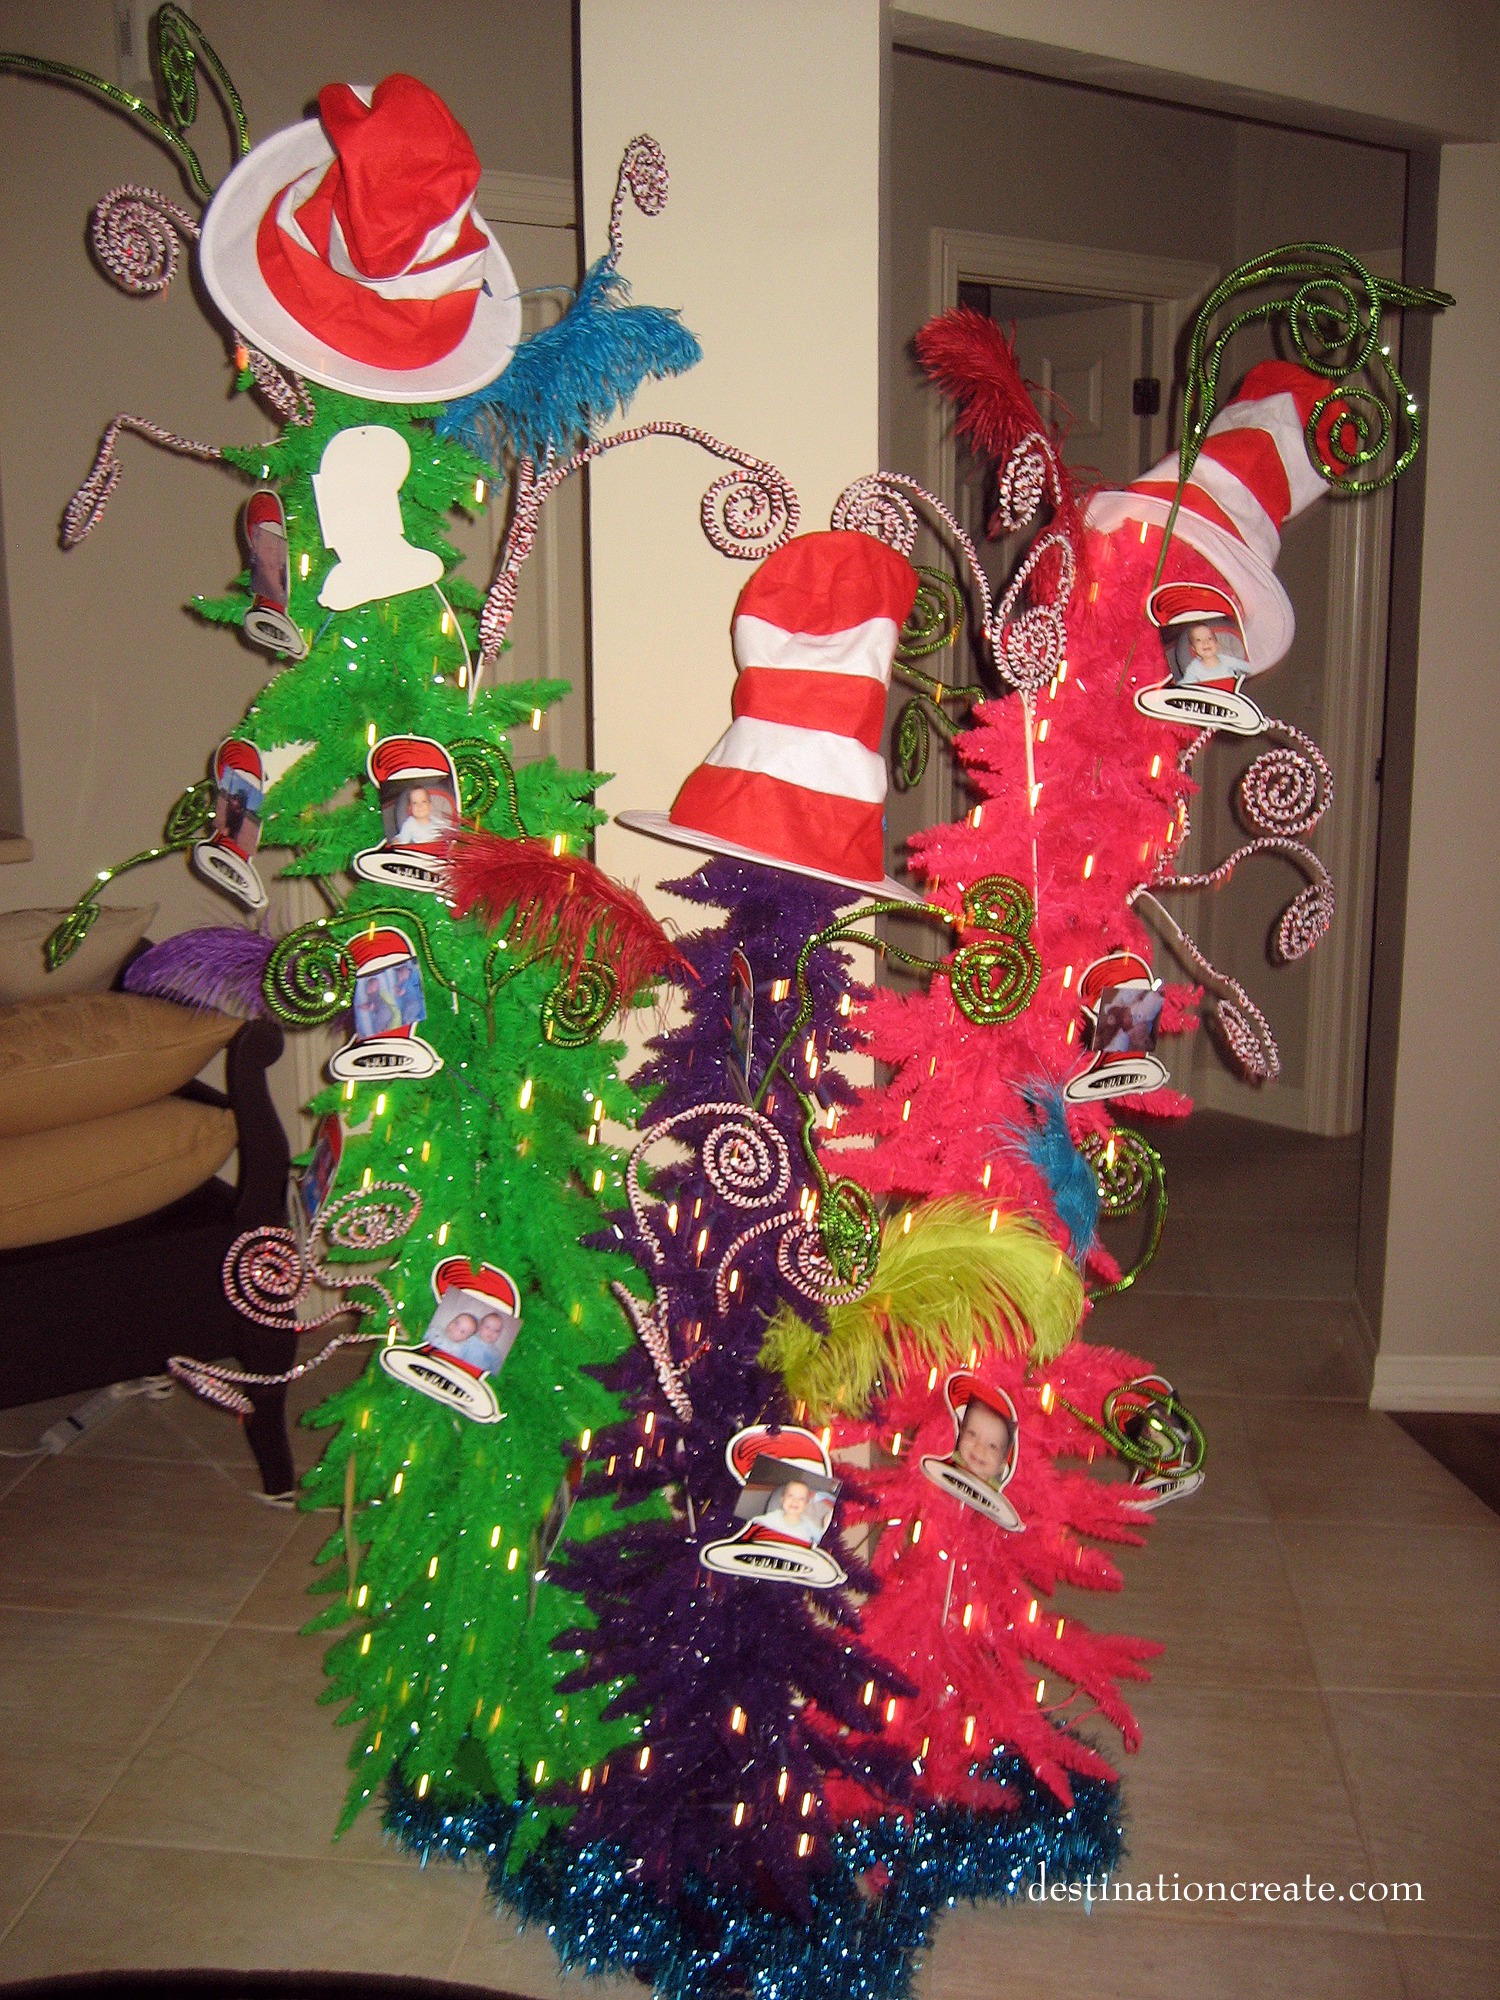 Brightly colored funky Christmas trees just scream Dr. Suess!